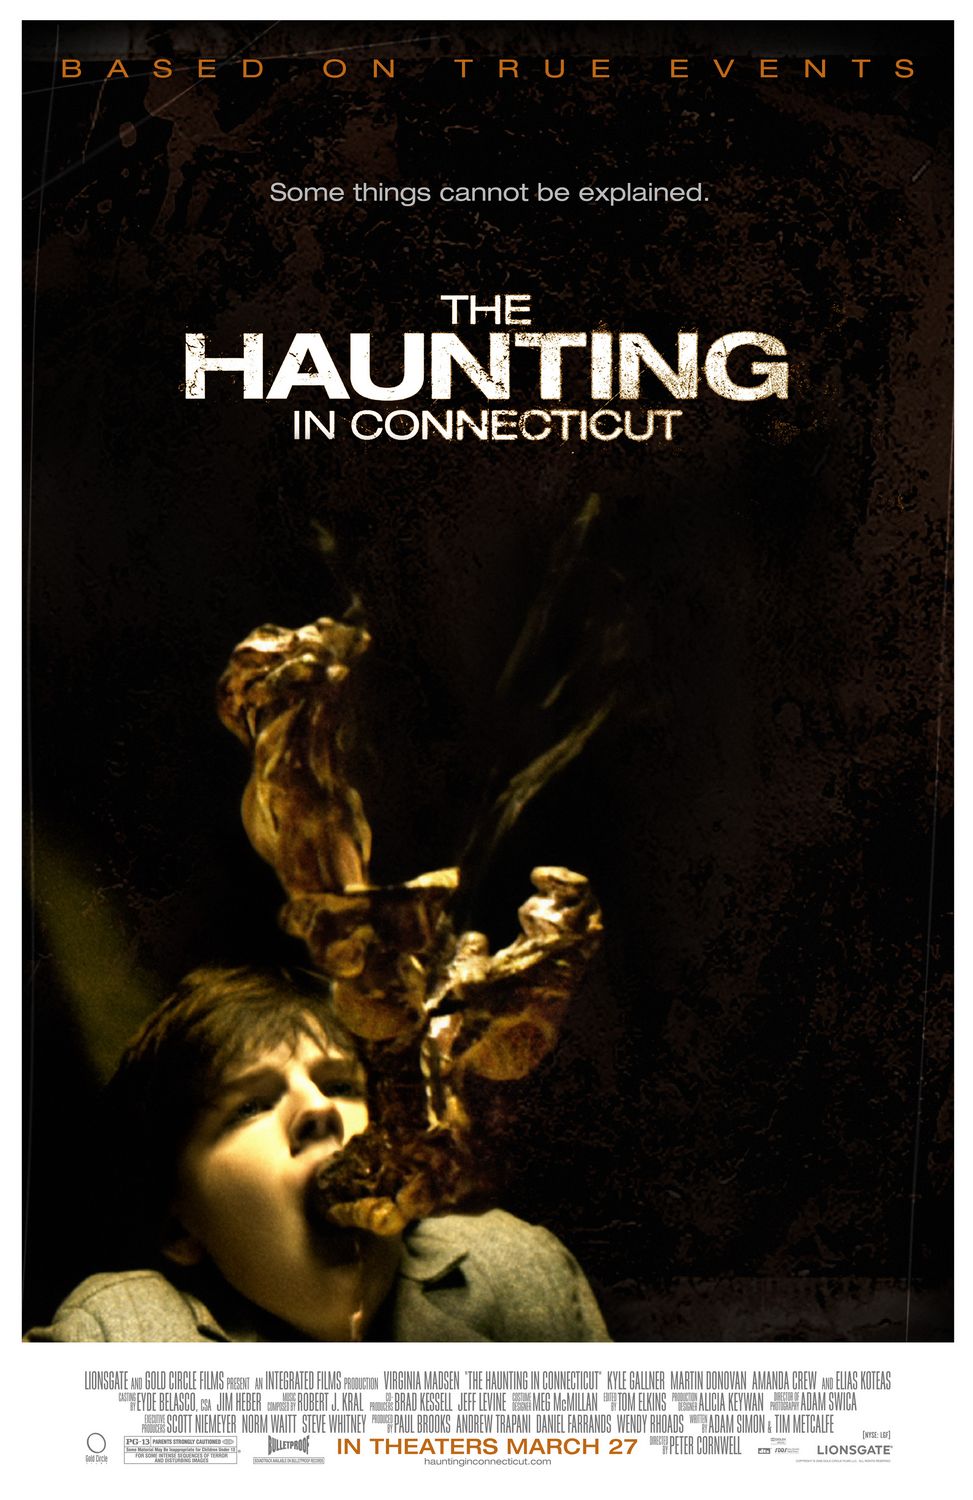 Film Excess The Haunting in Connecticut (2009) Virginia Madsen as